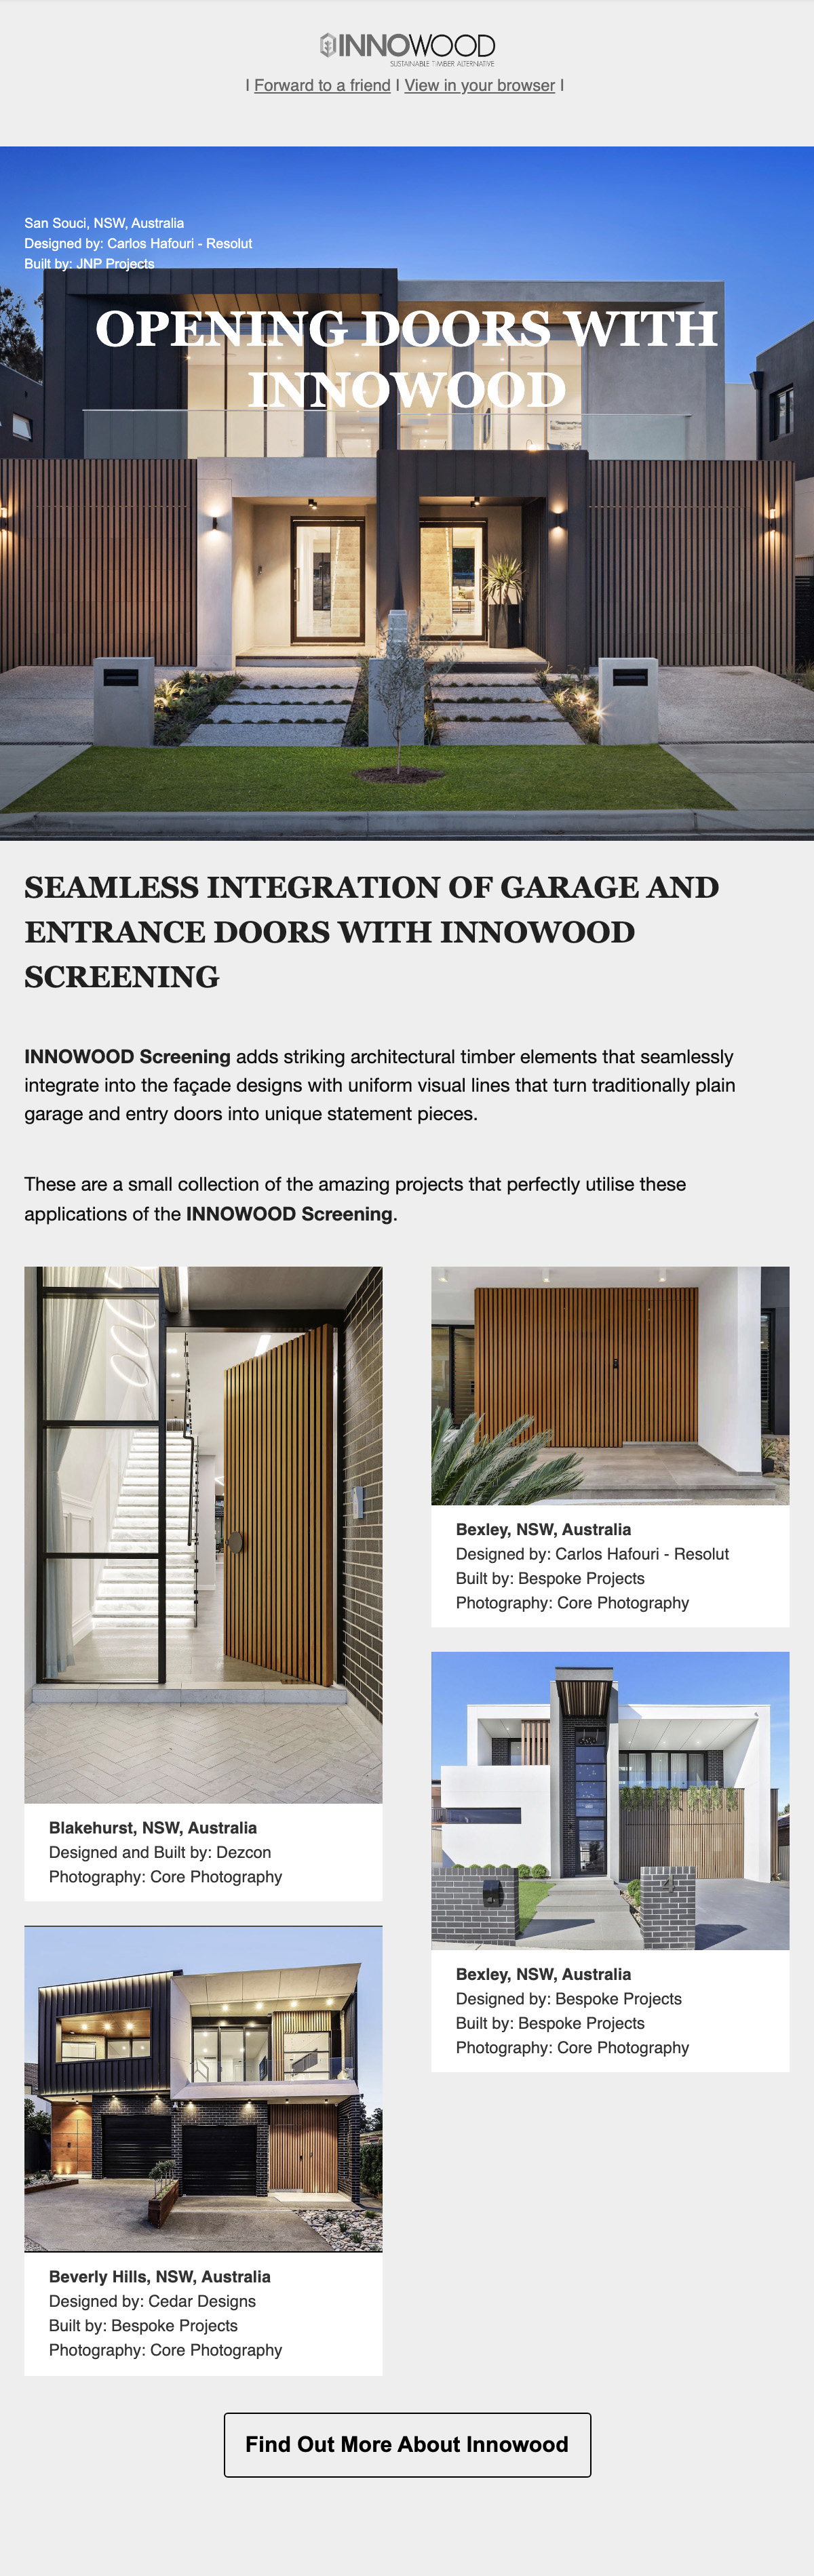 Opening Doors With Innowood